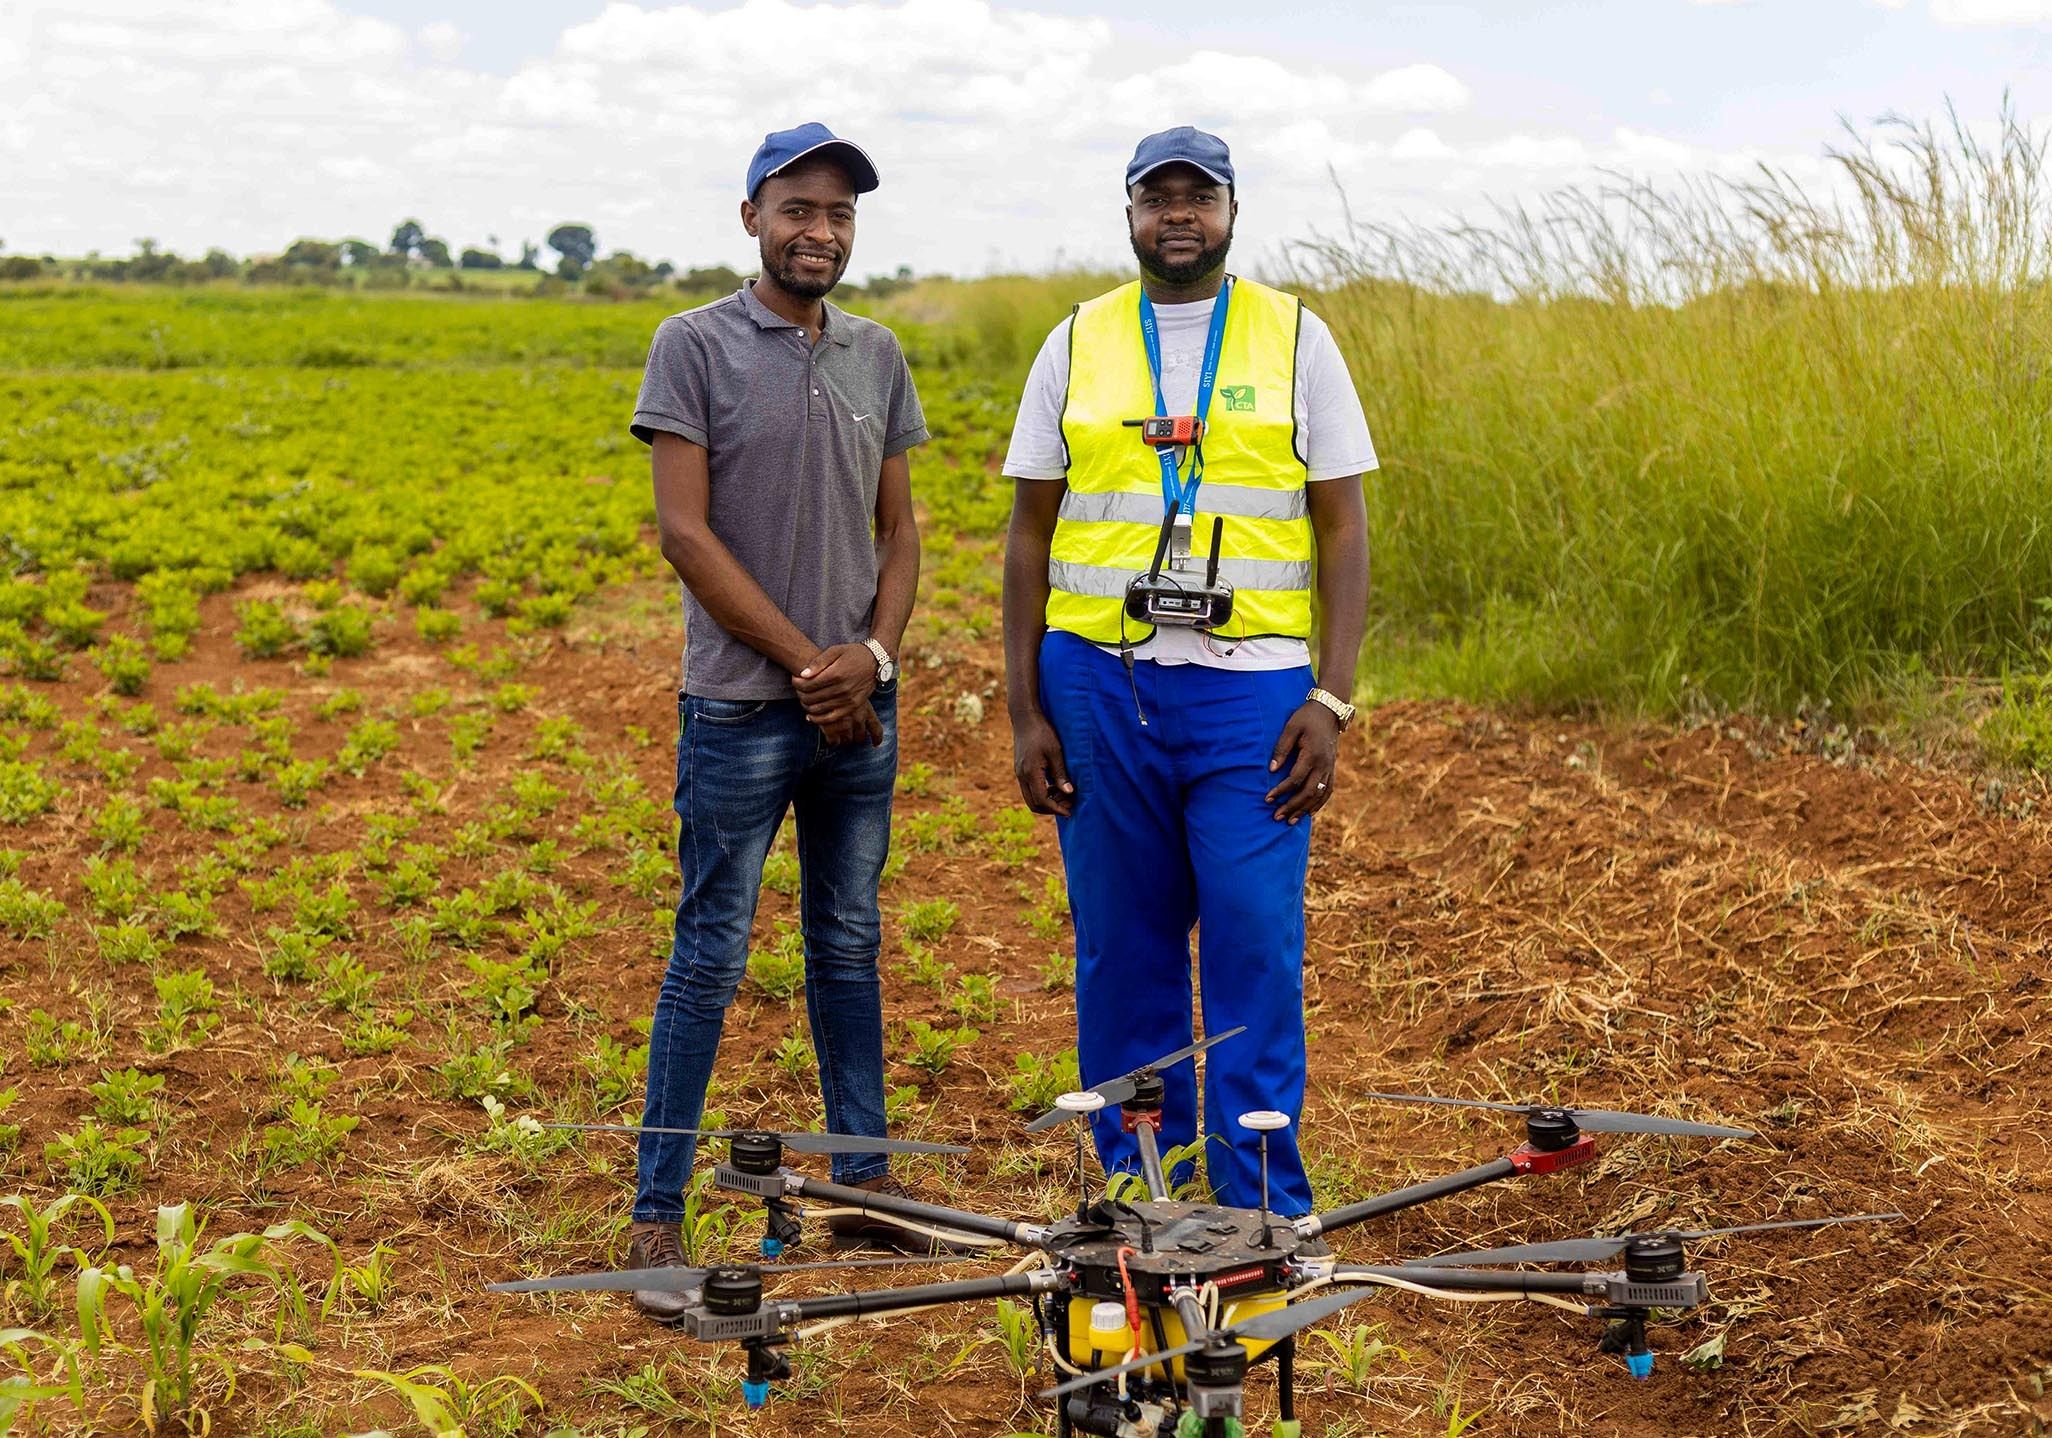 This bootstrapped drone startup is promoting smart farming in Zimbabwe